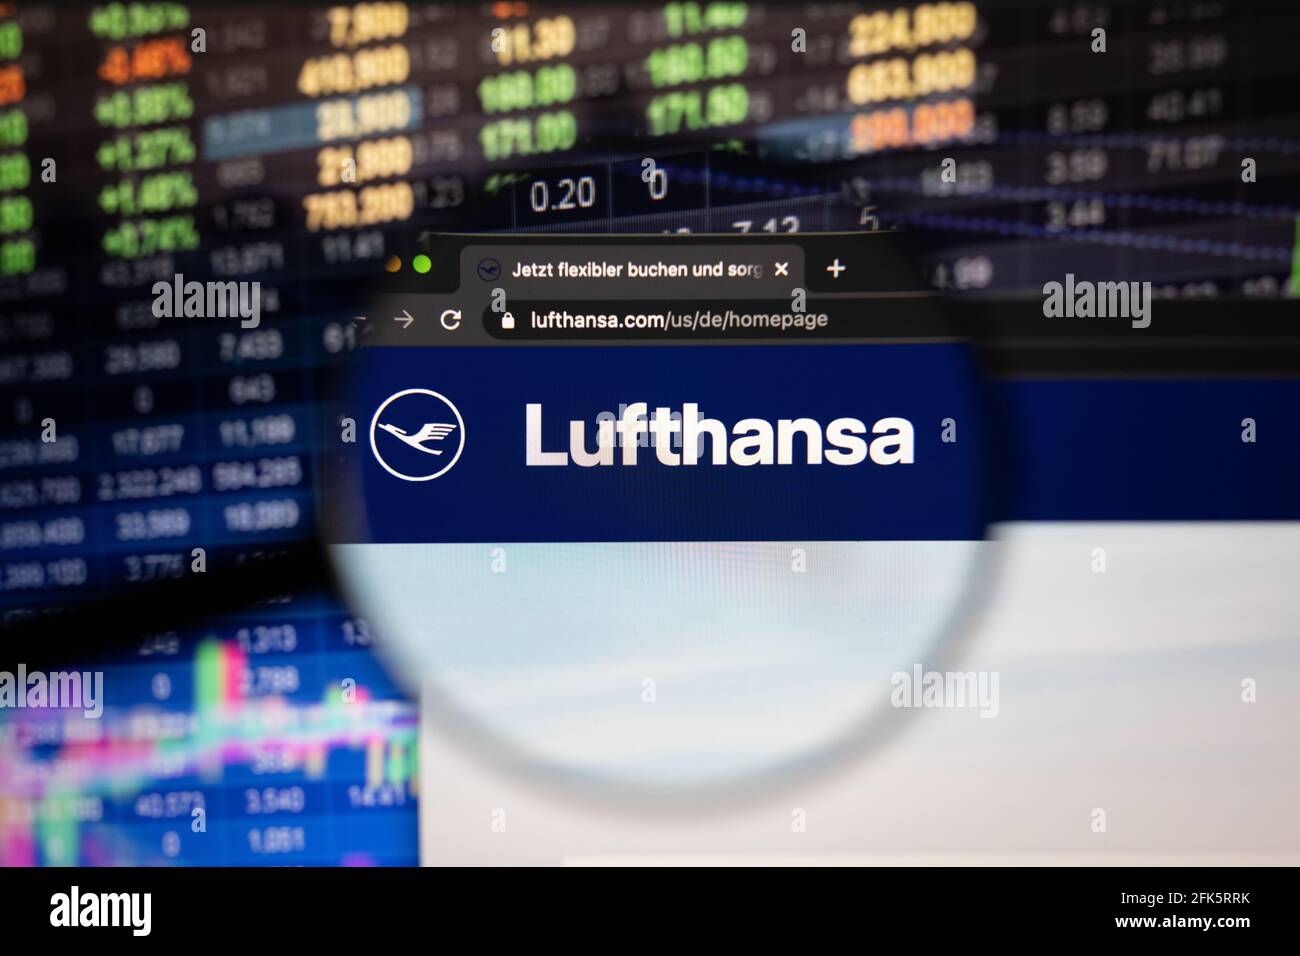 Lufthansa company logo on a website with blurry stock market developments in the background, seen on a computer screen through a magnifying glass Stock Photo